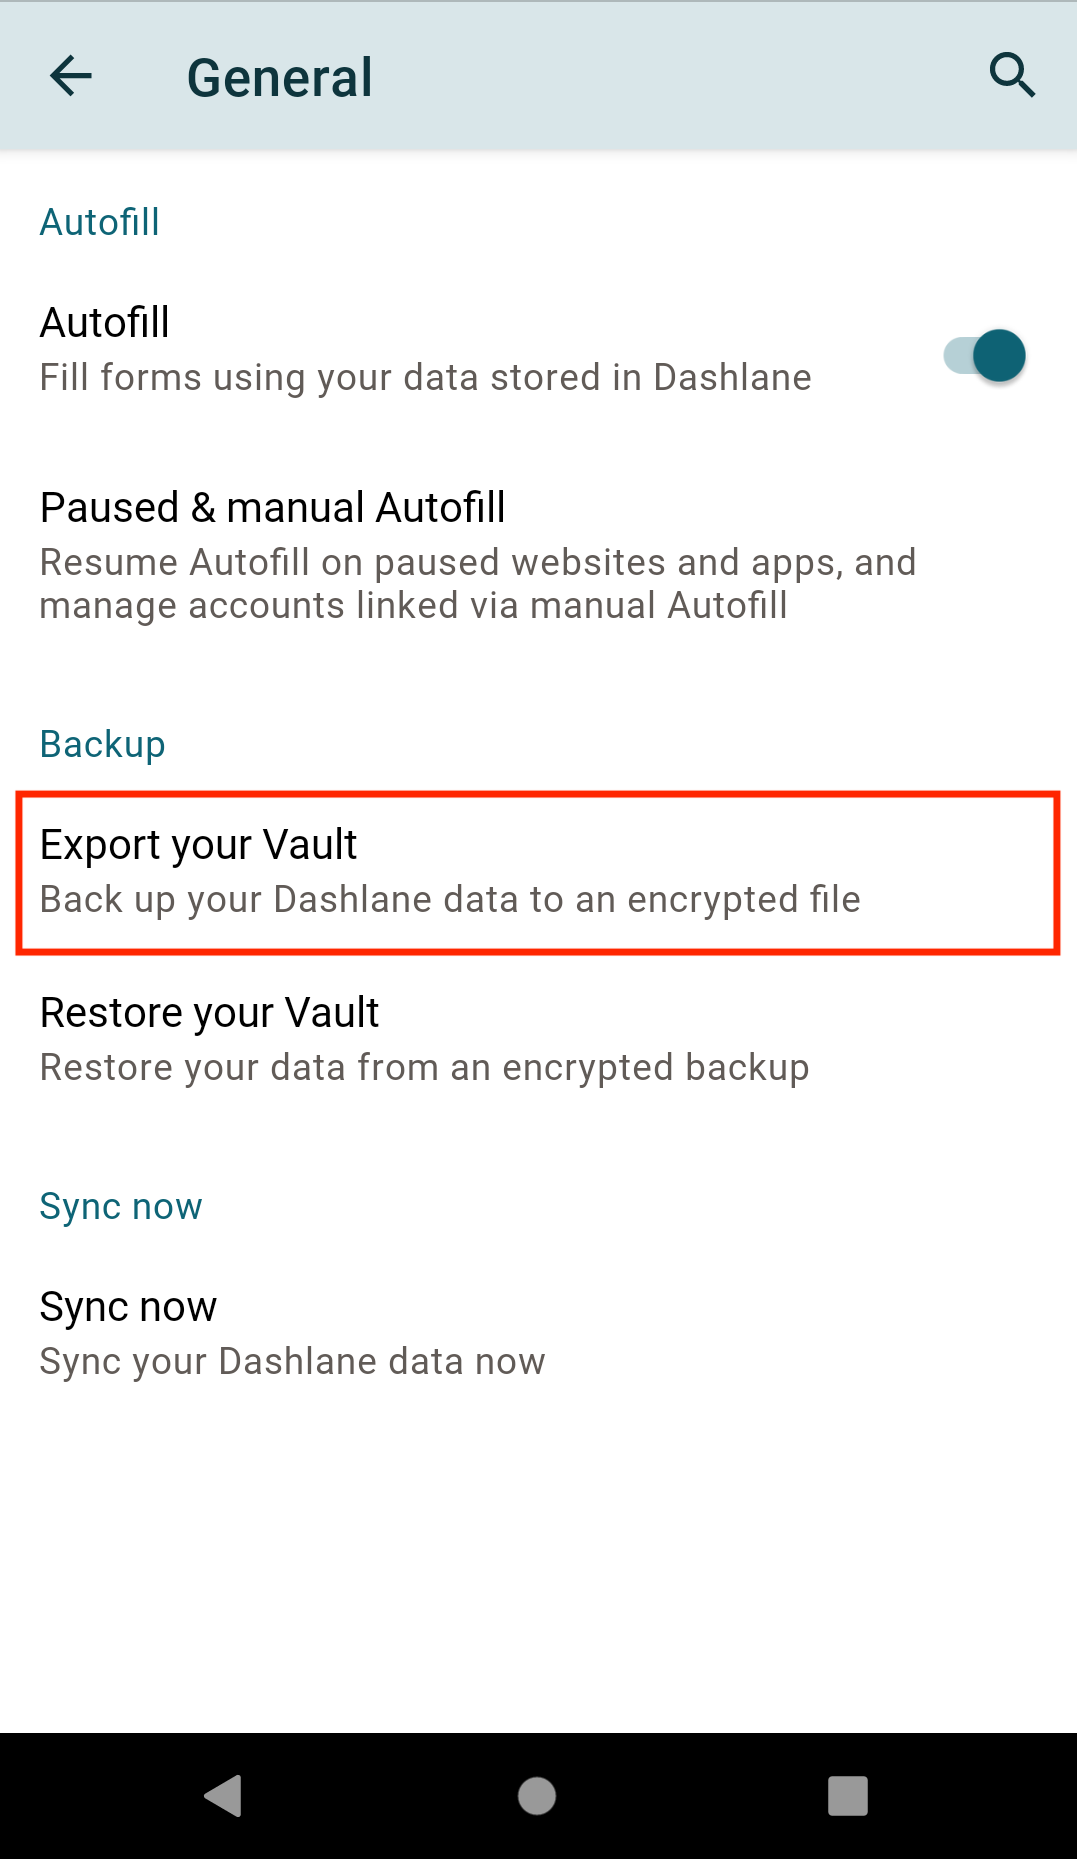 reset avast password manager sync